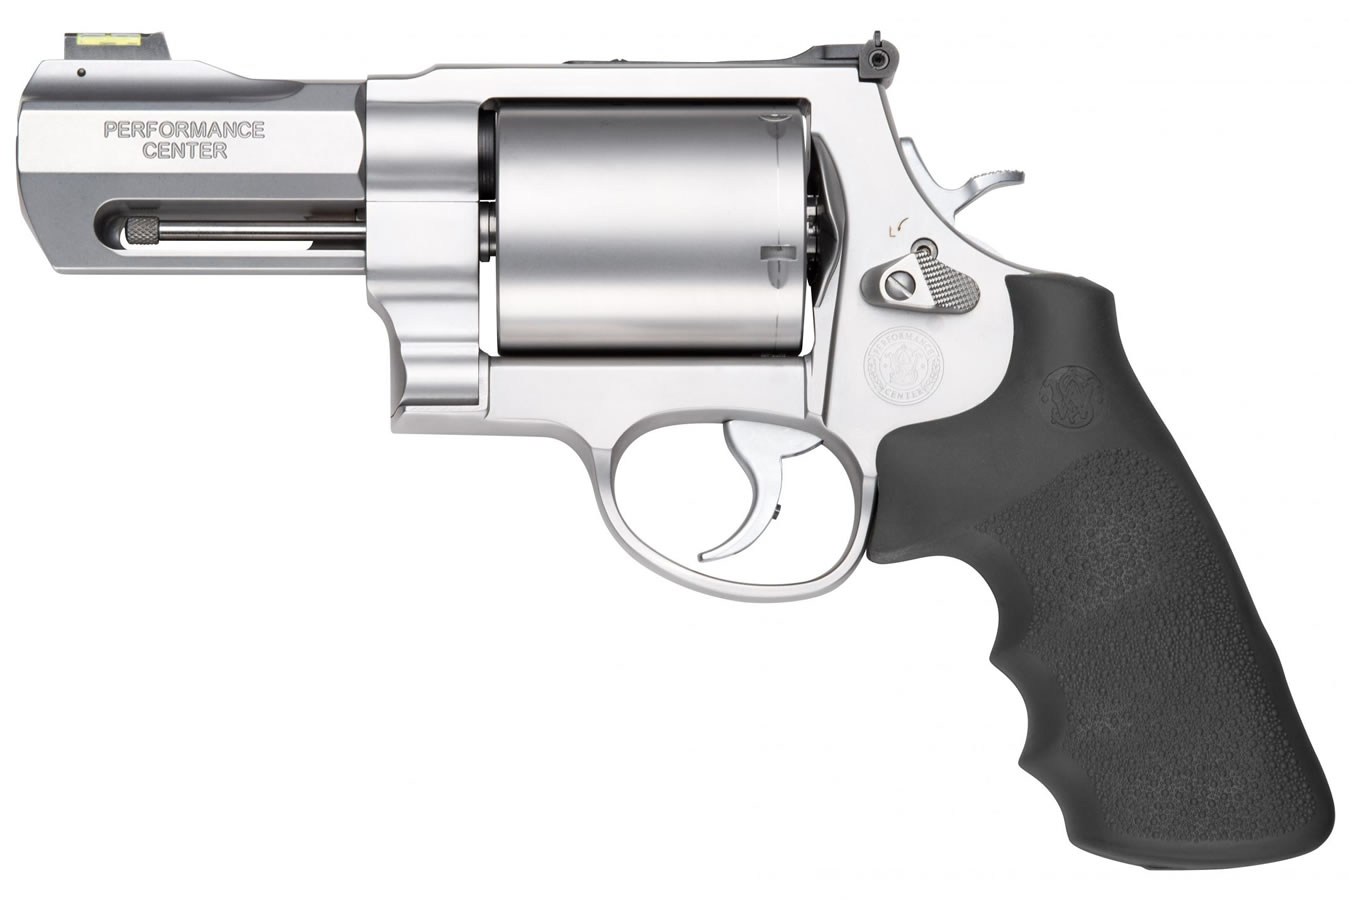 SMITH AND WESSON MODEL 500 PERFORMANCE CENTER 500SW